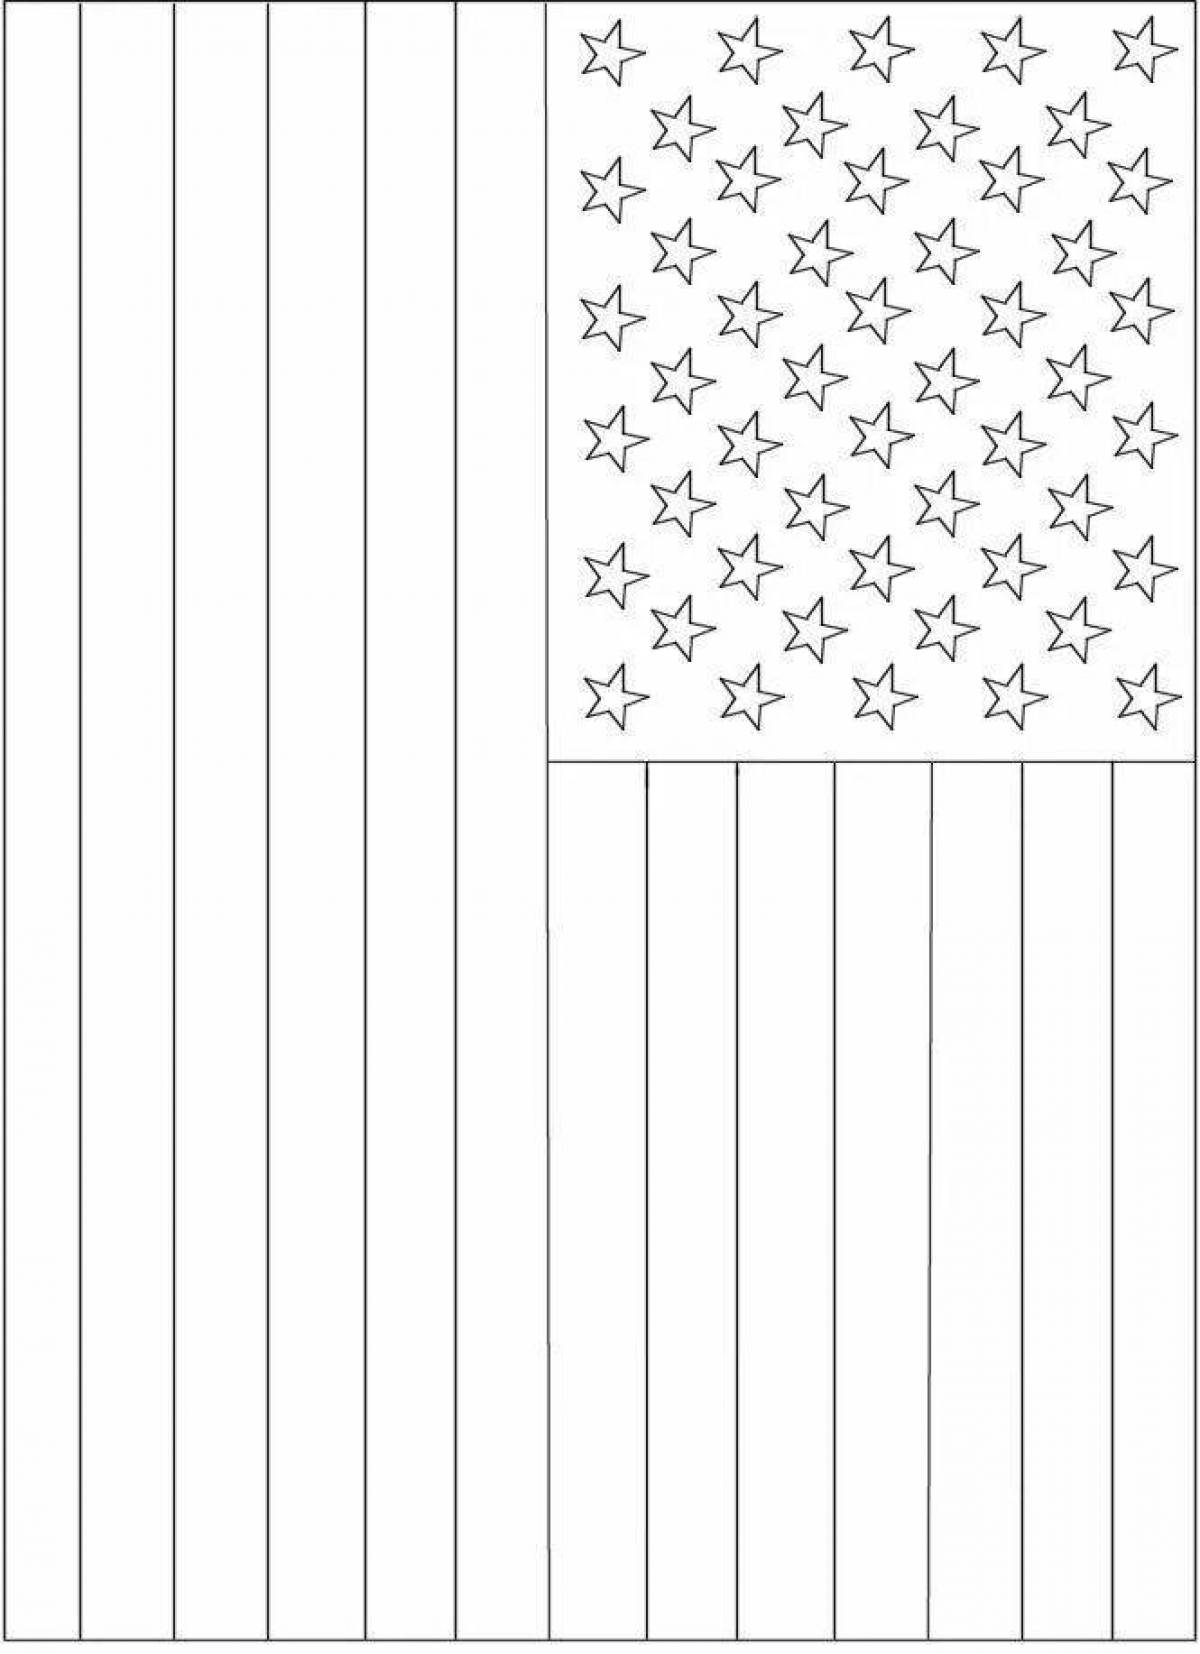 Coloring page with bright american flag